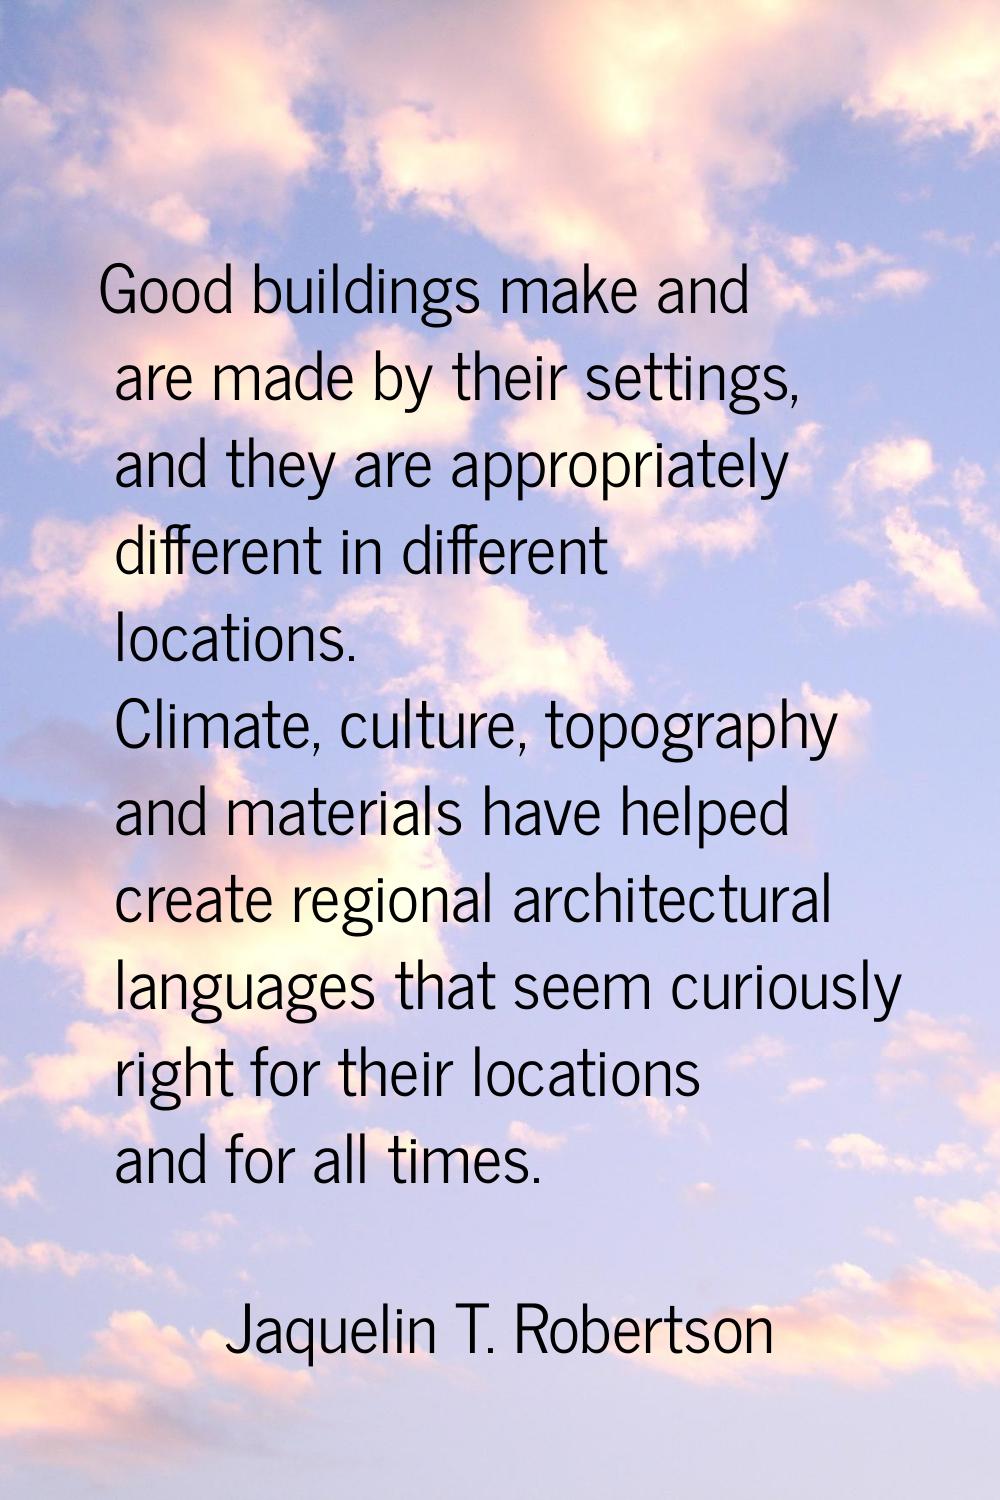 Good buildings make and are made by their settings, and they are appropriately different in differe